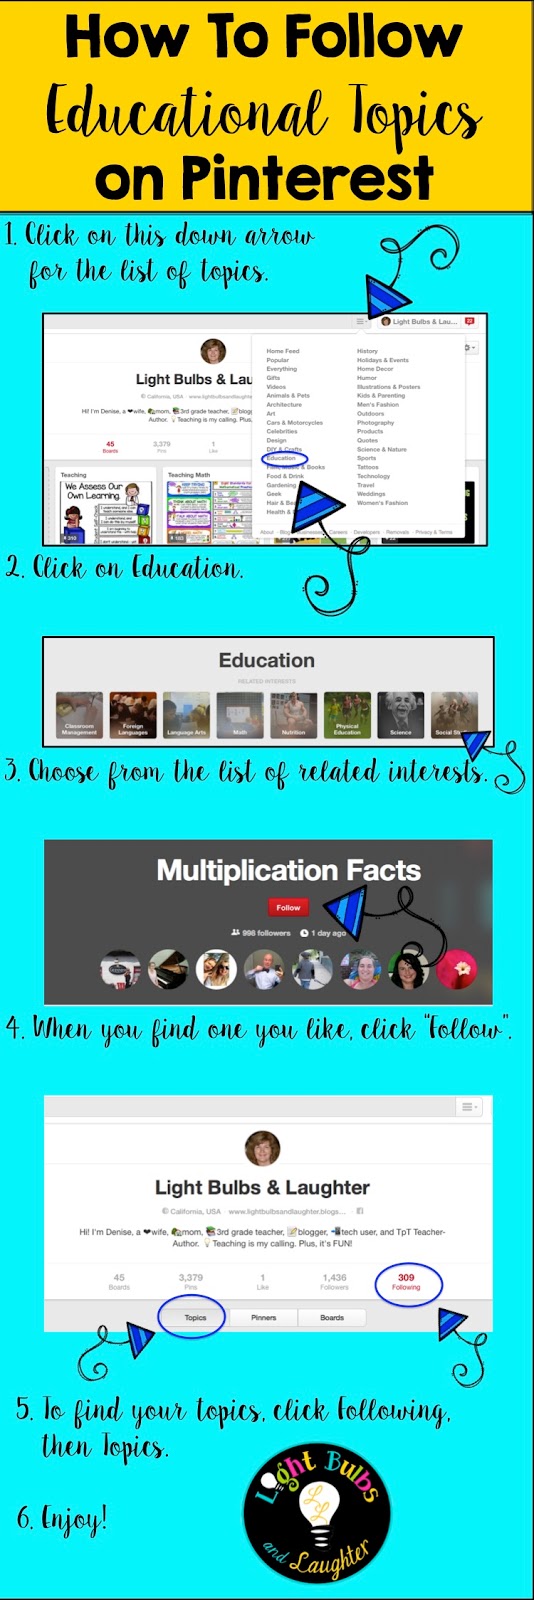 How To Follow Educational Topics on Pinterest - Light Bulbs and Laughter Blog